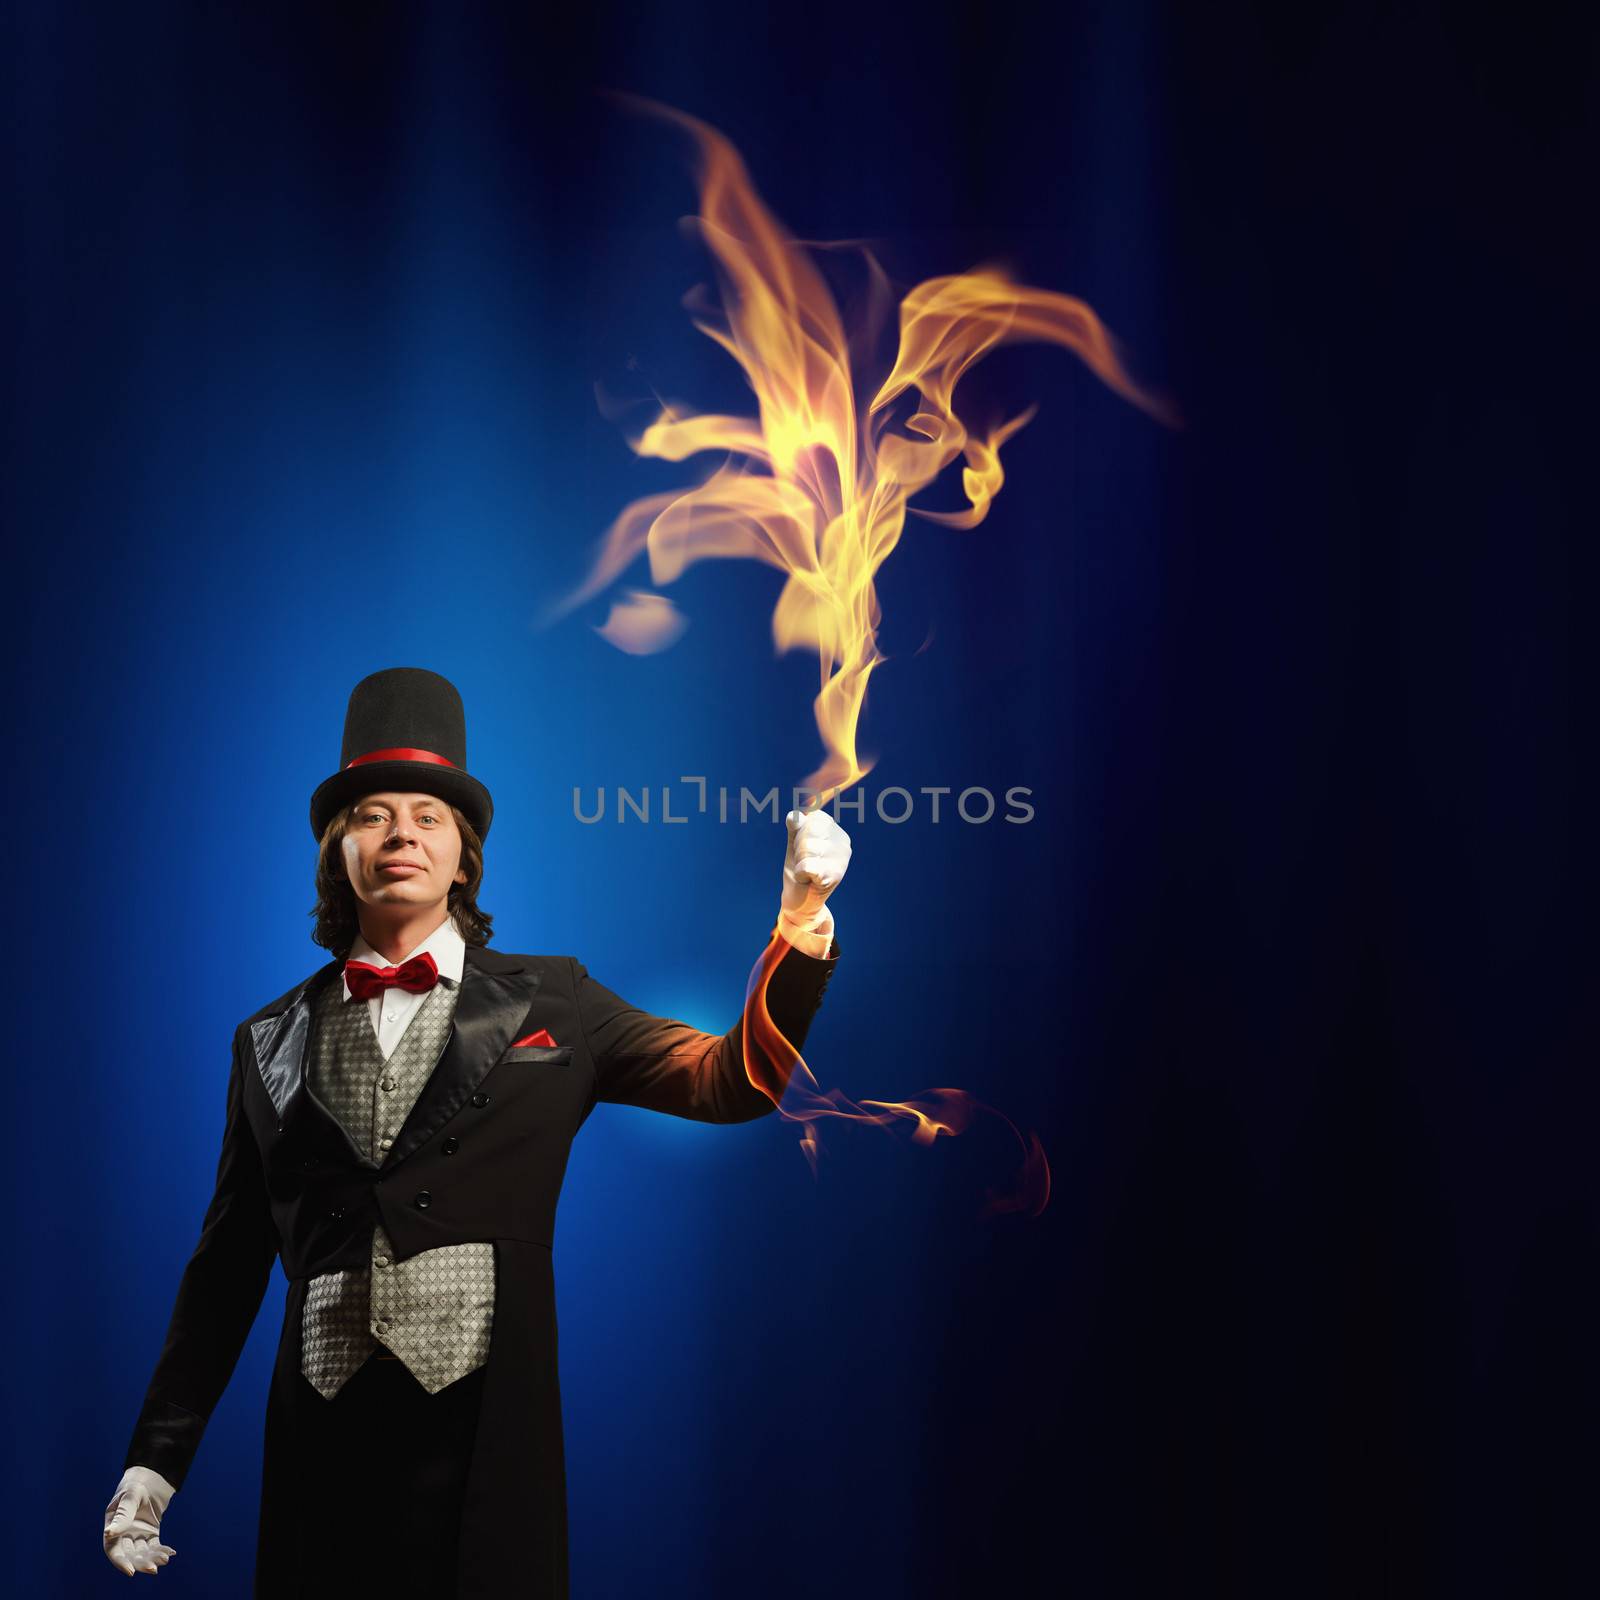 Magician in hat by sergey_nivens